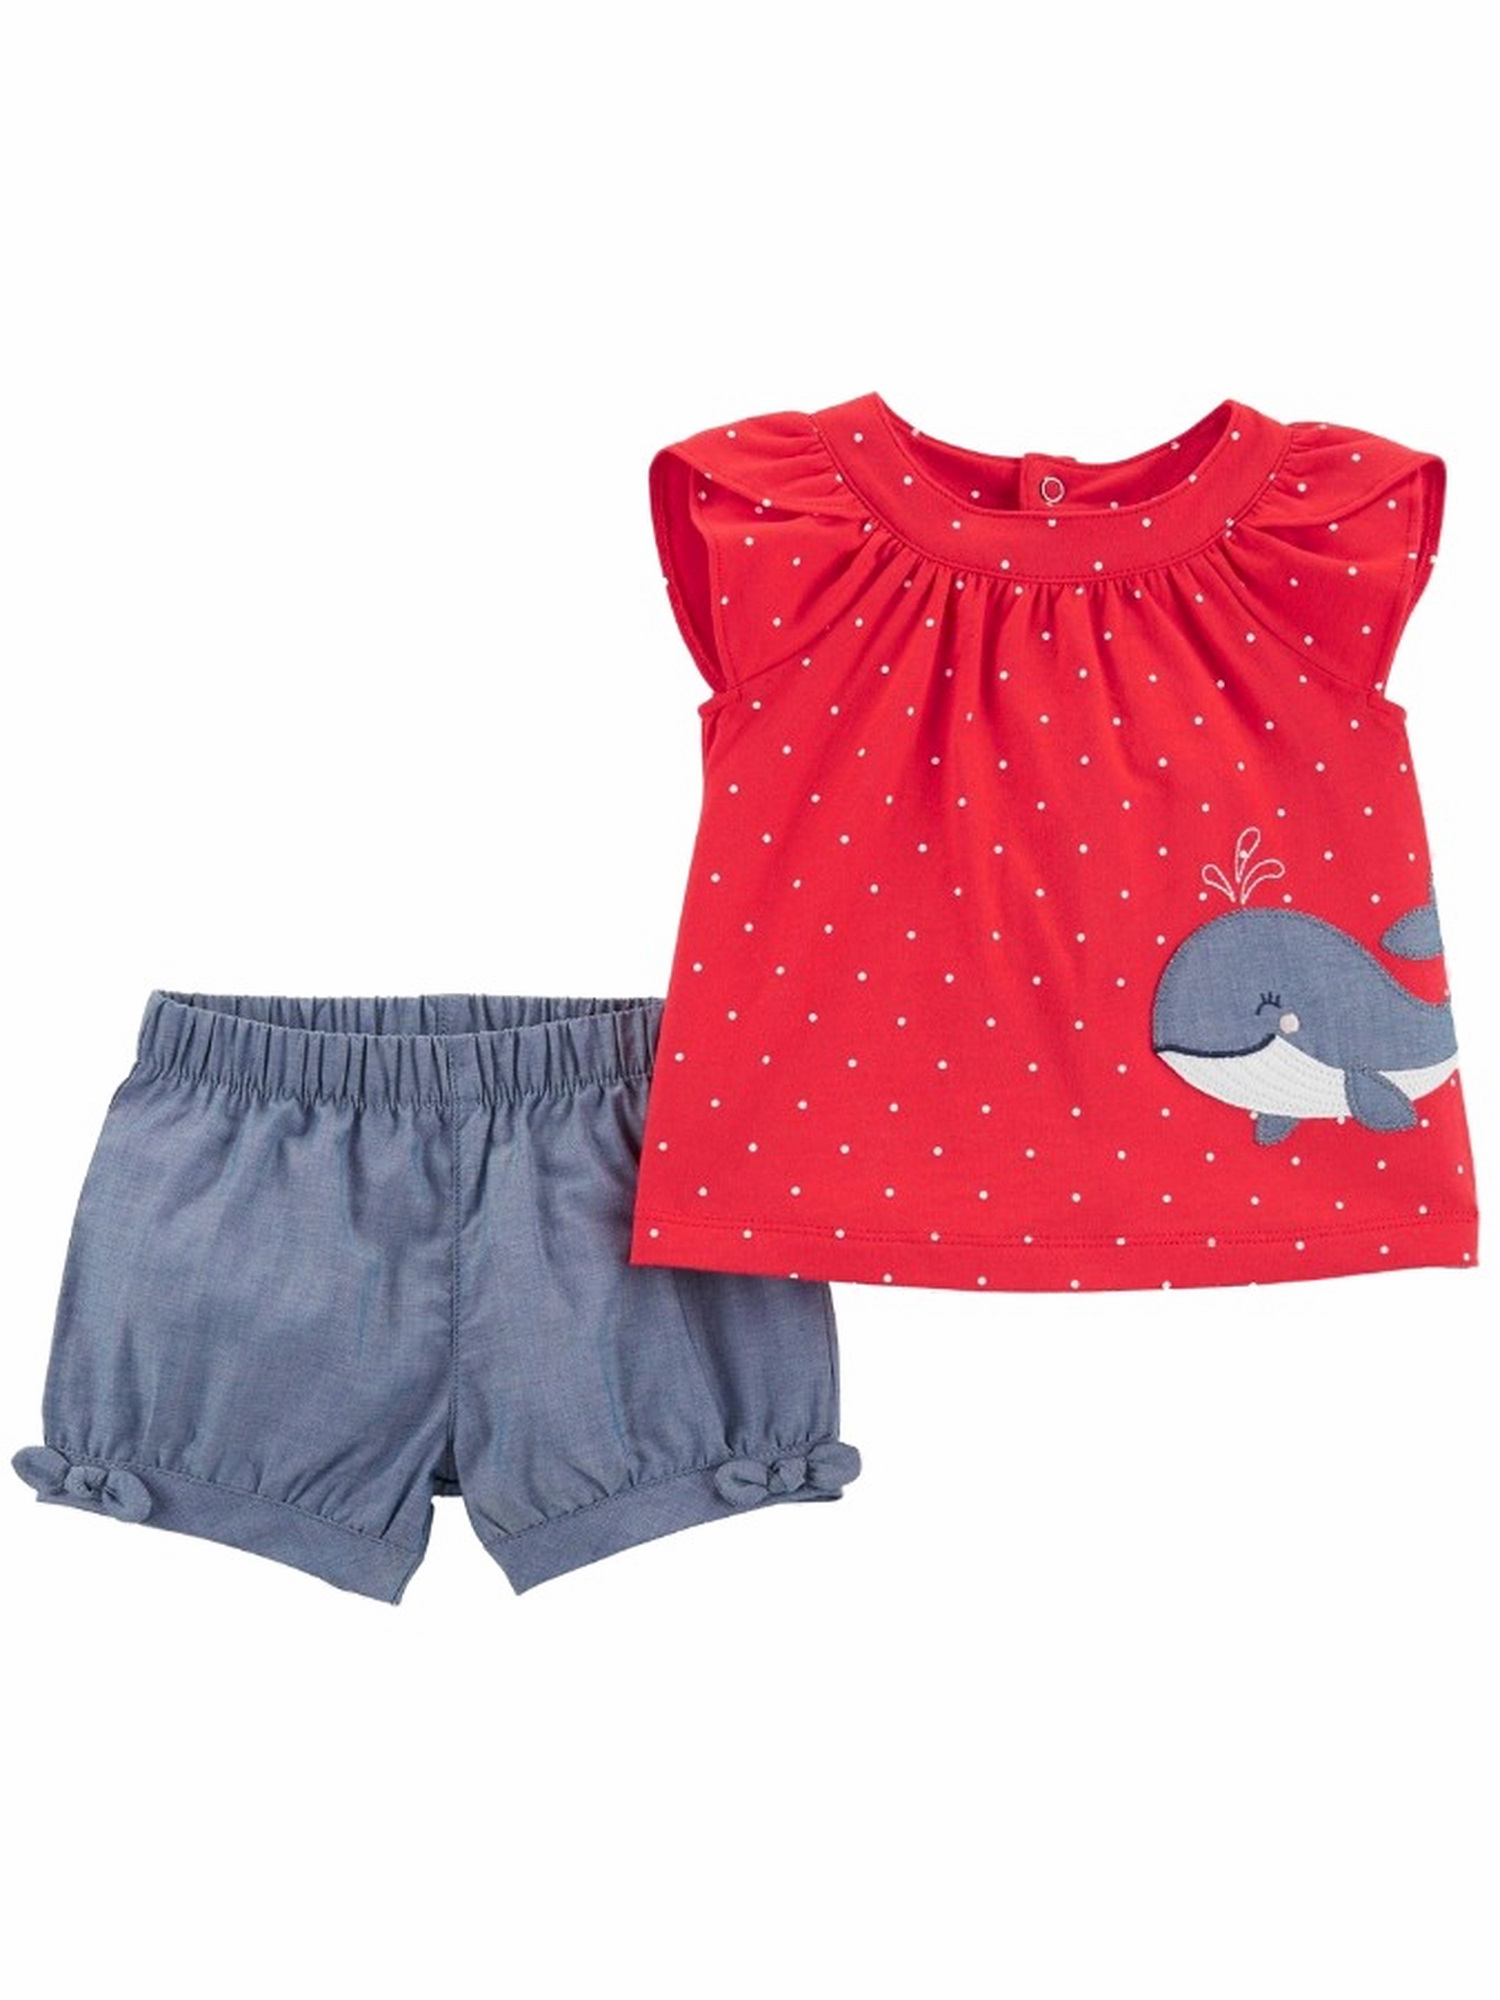 Carter's Carters Infant Baby Girls Red Blue Whale Top & Shorts 2Pc Summer Set